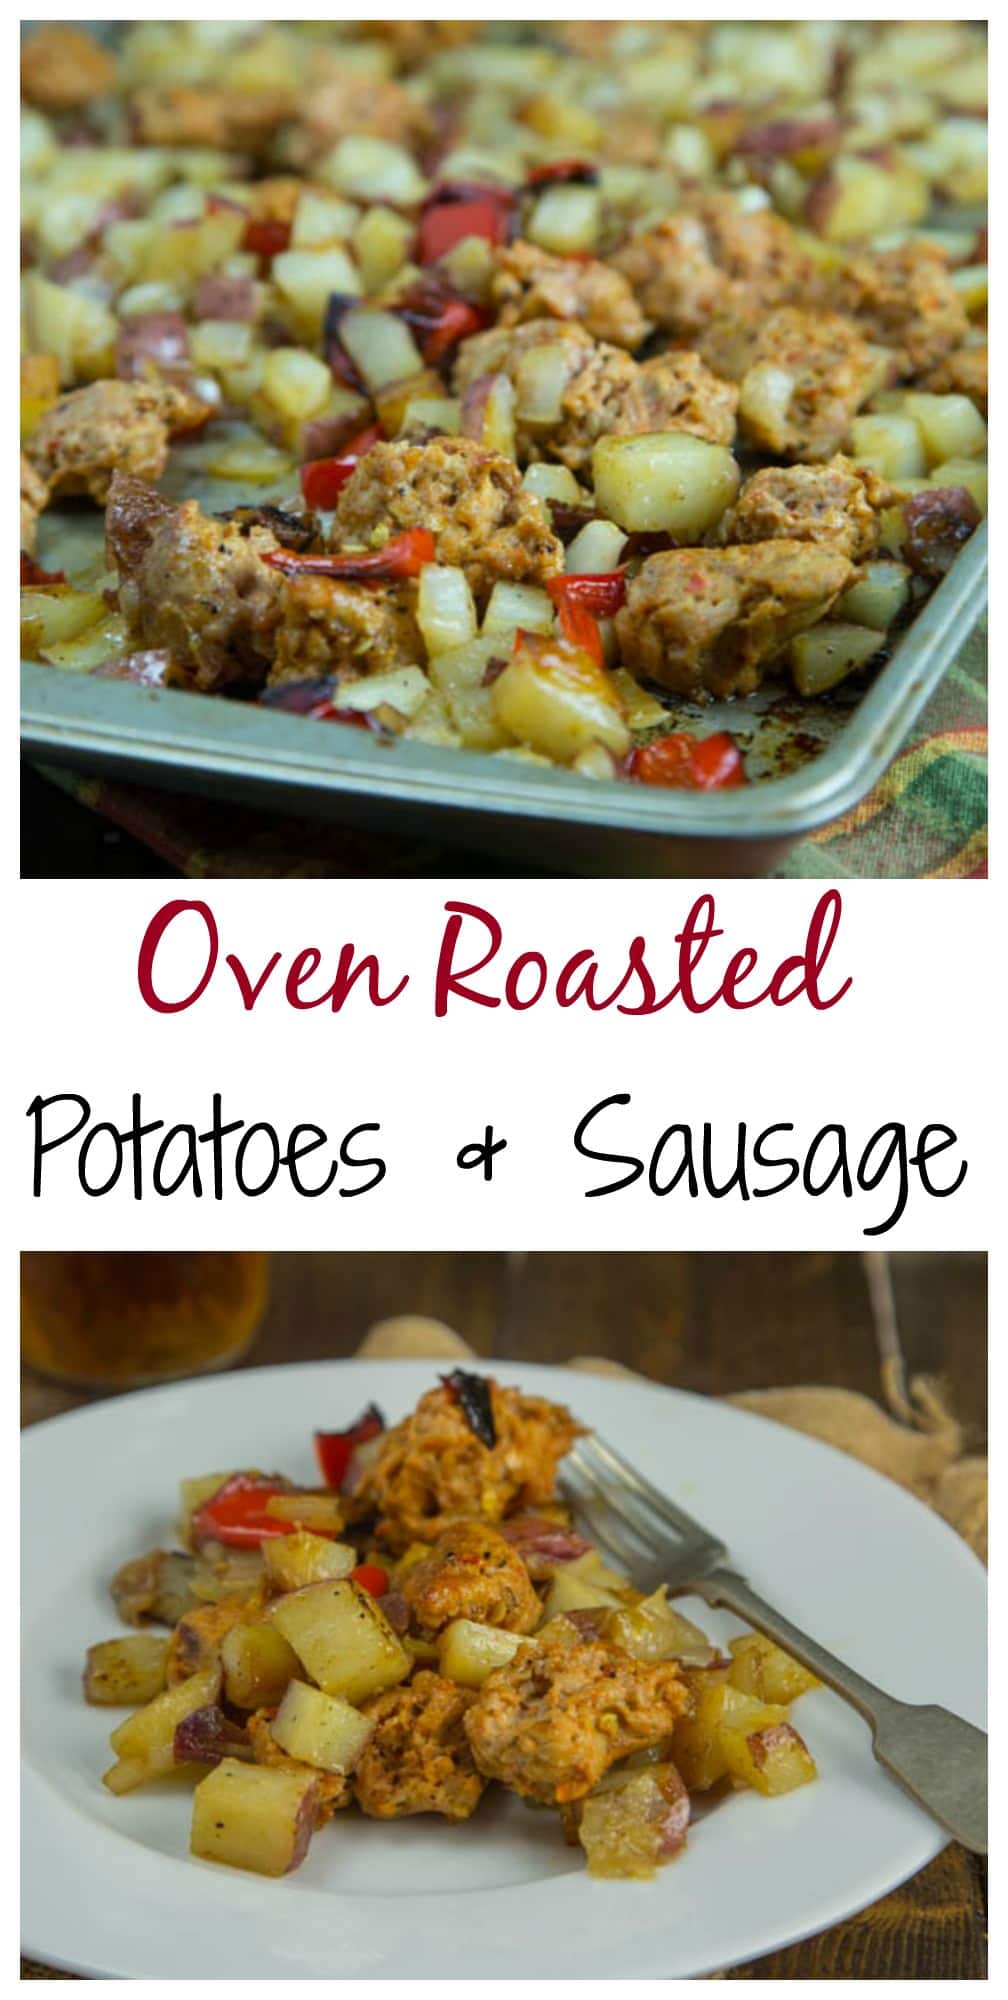 Oven Roasted Potatoes and Sausage - Crispy oven roasted potatoes, peppers and onions, with your favorite sausage.  Great one pan meal for any night of the week.